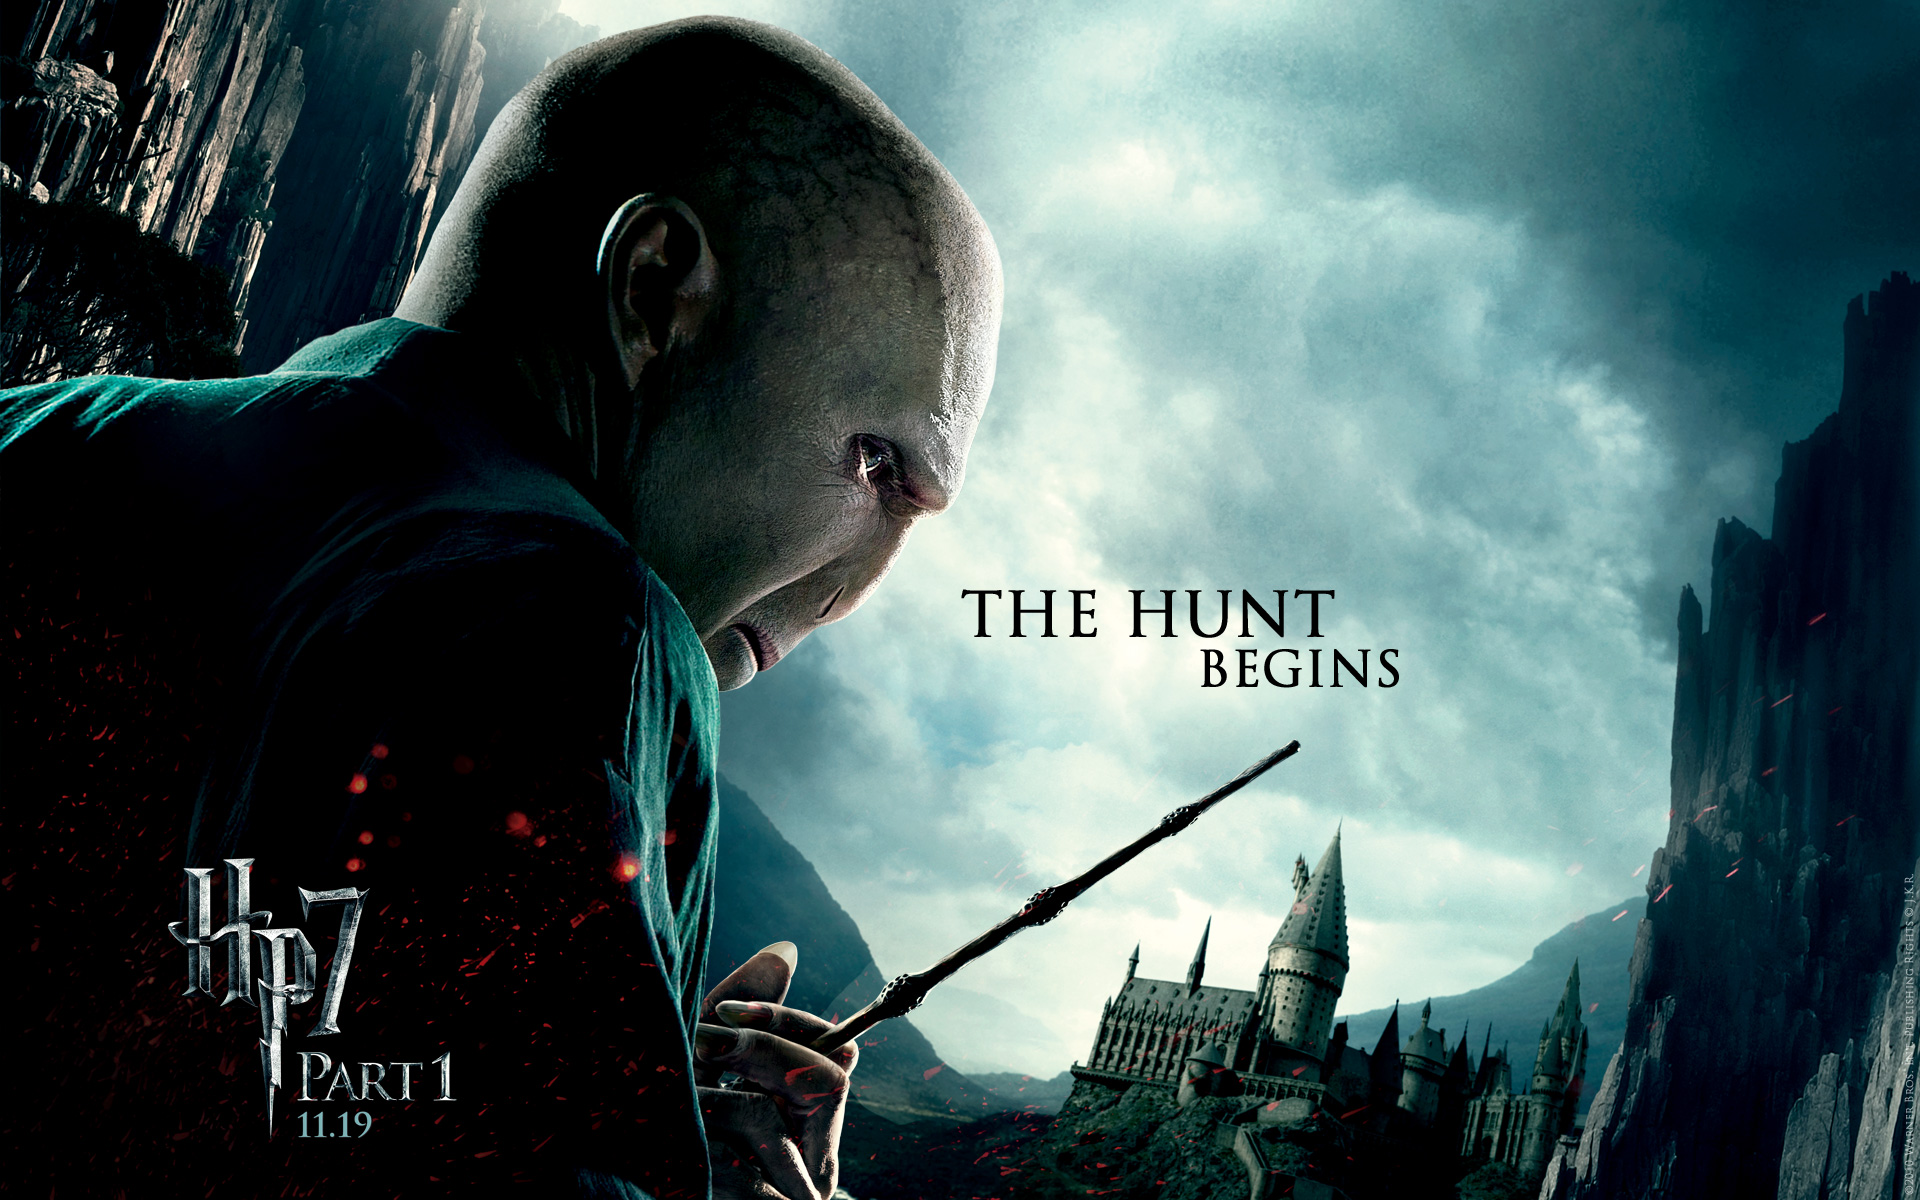 People 1920x1200 Harry Potter Harry Potter and the Deathly Hallows Lord Voldemort movies